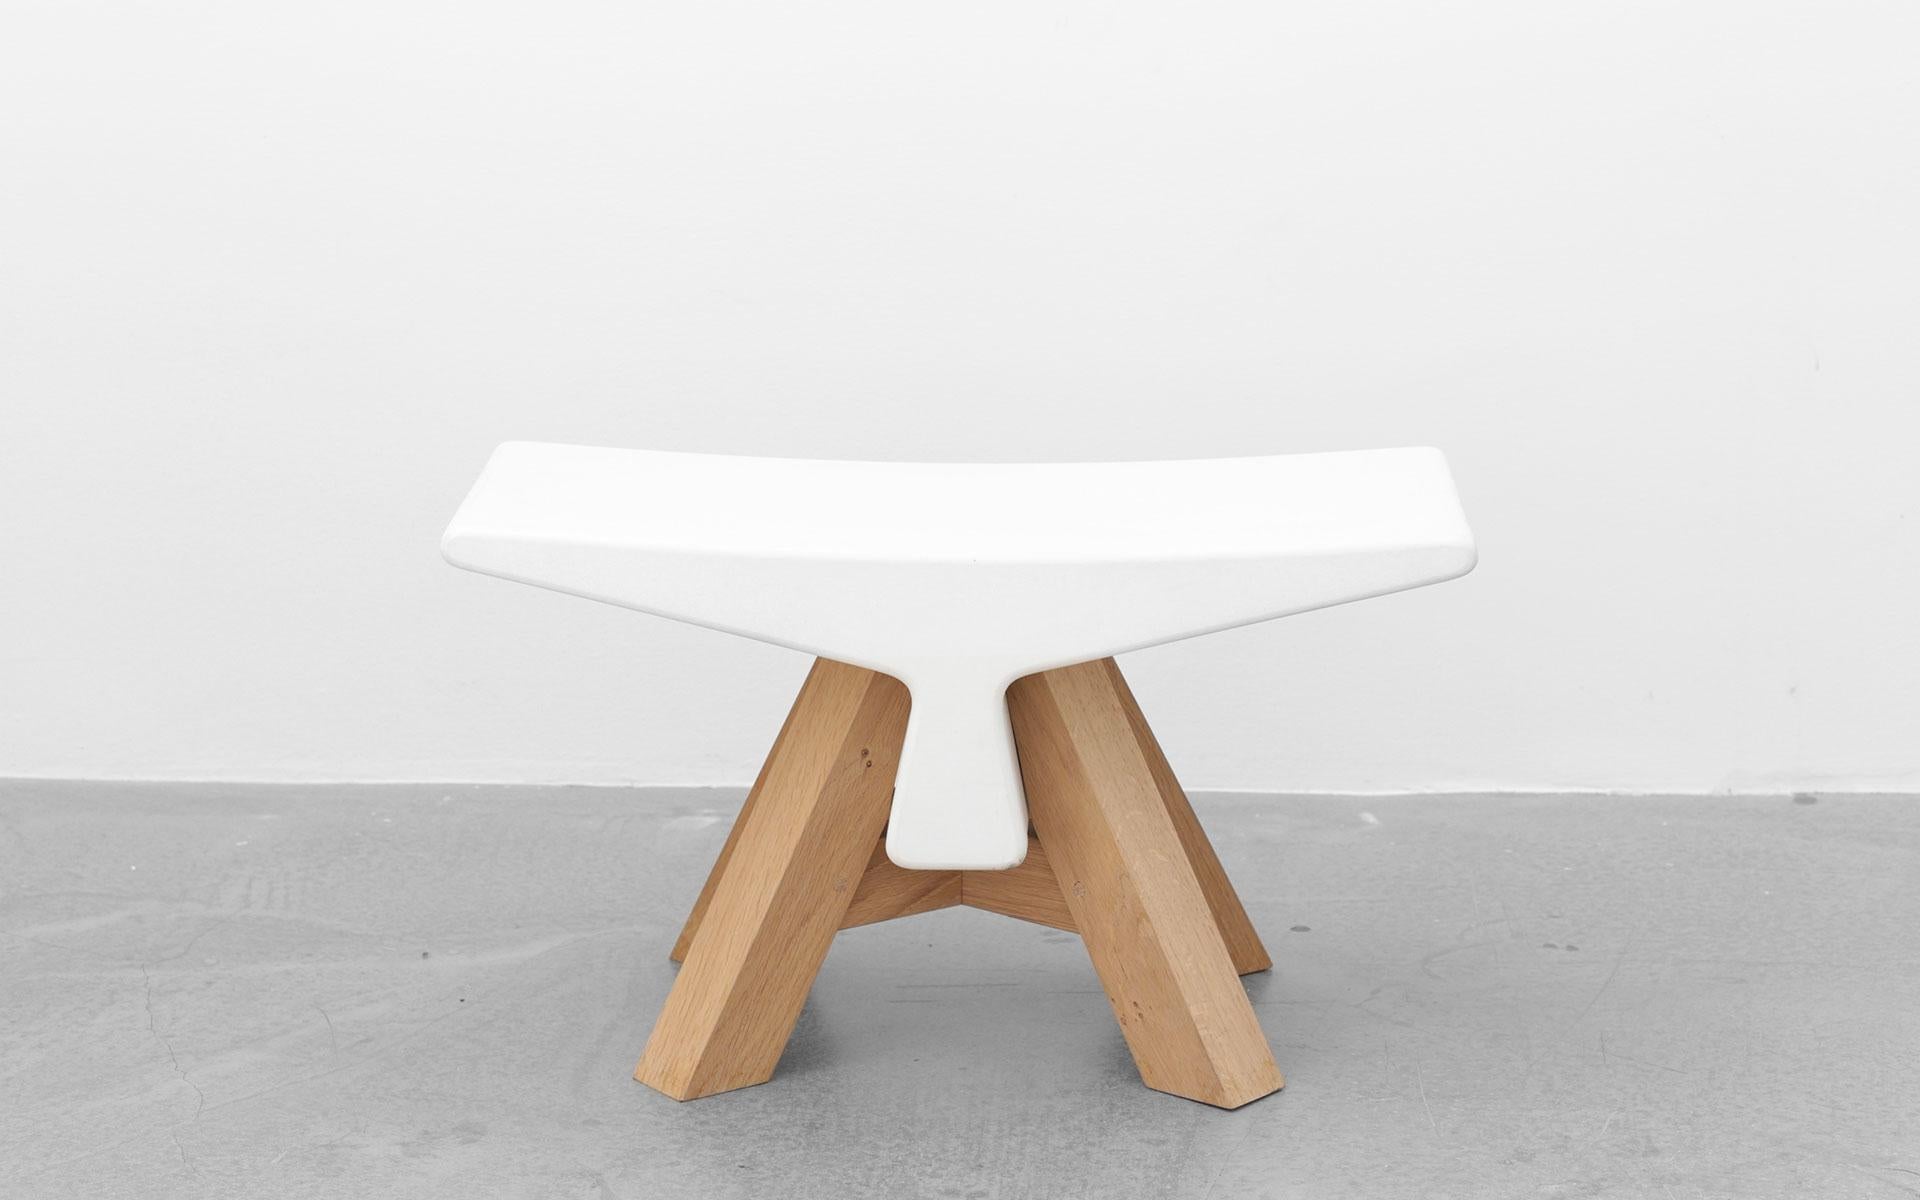 Bone Ductal is a molded concrete and oak stool, a step up from its marble version on the evolutionary scale. Convoking the timeless, aspiring to meditation, the Bone Ductal stool uses archetypes, half-way between an Asian neck-support and a Japanese